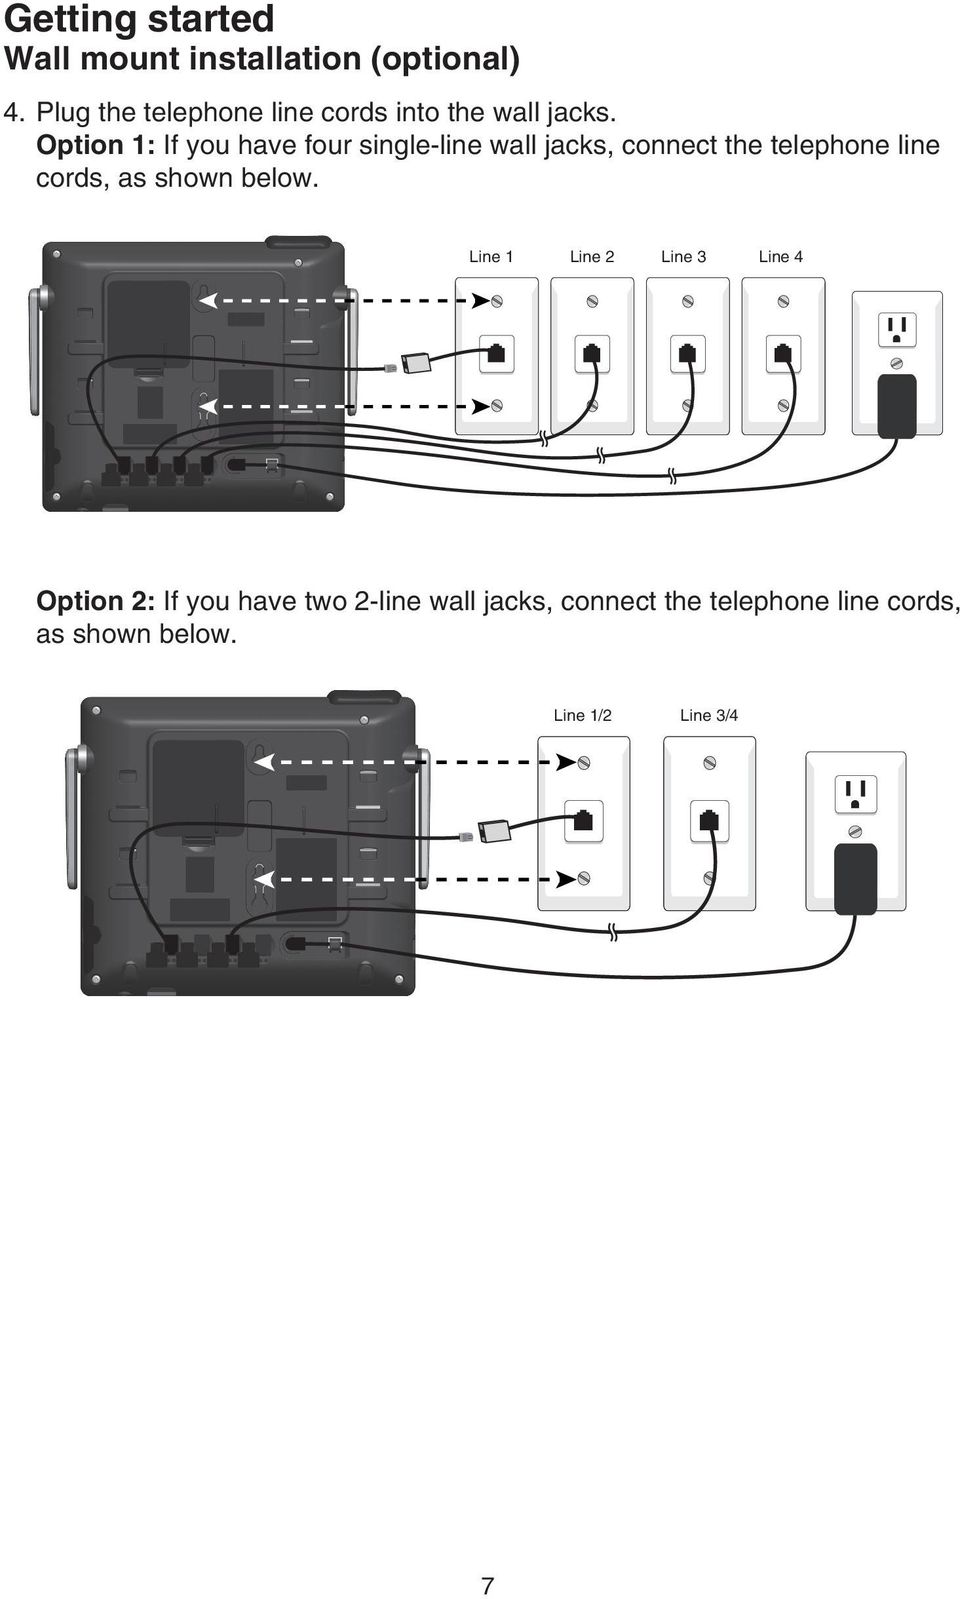 Option 1: If you have four single-line wall jacks, connect the telephone line cords,